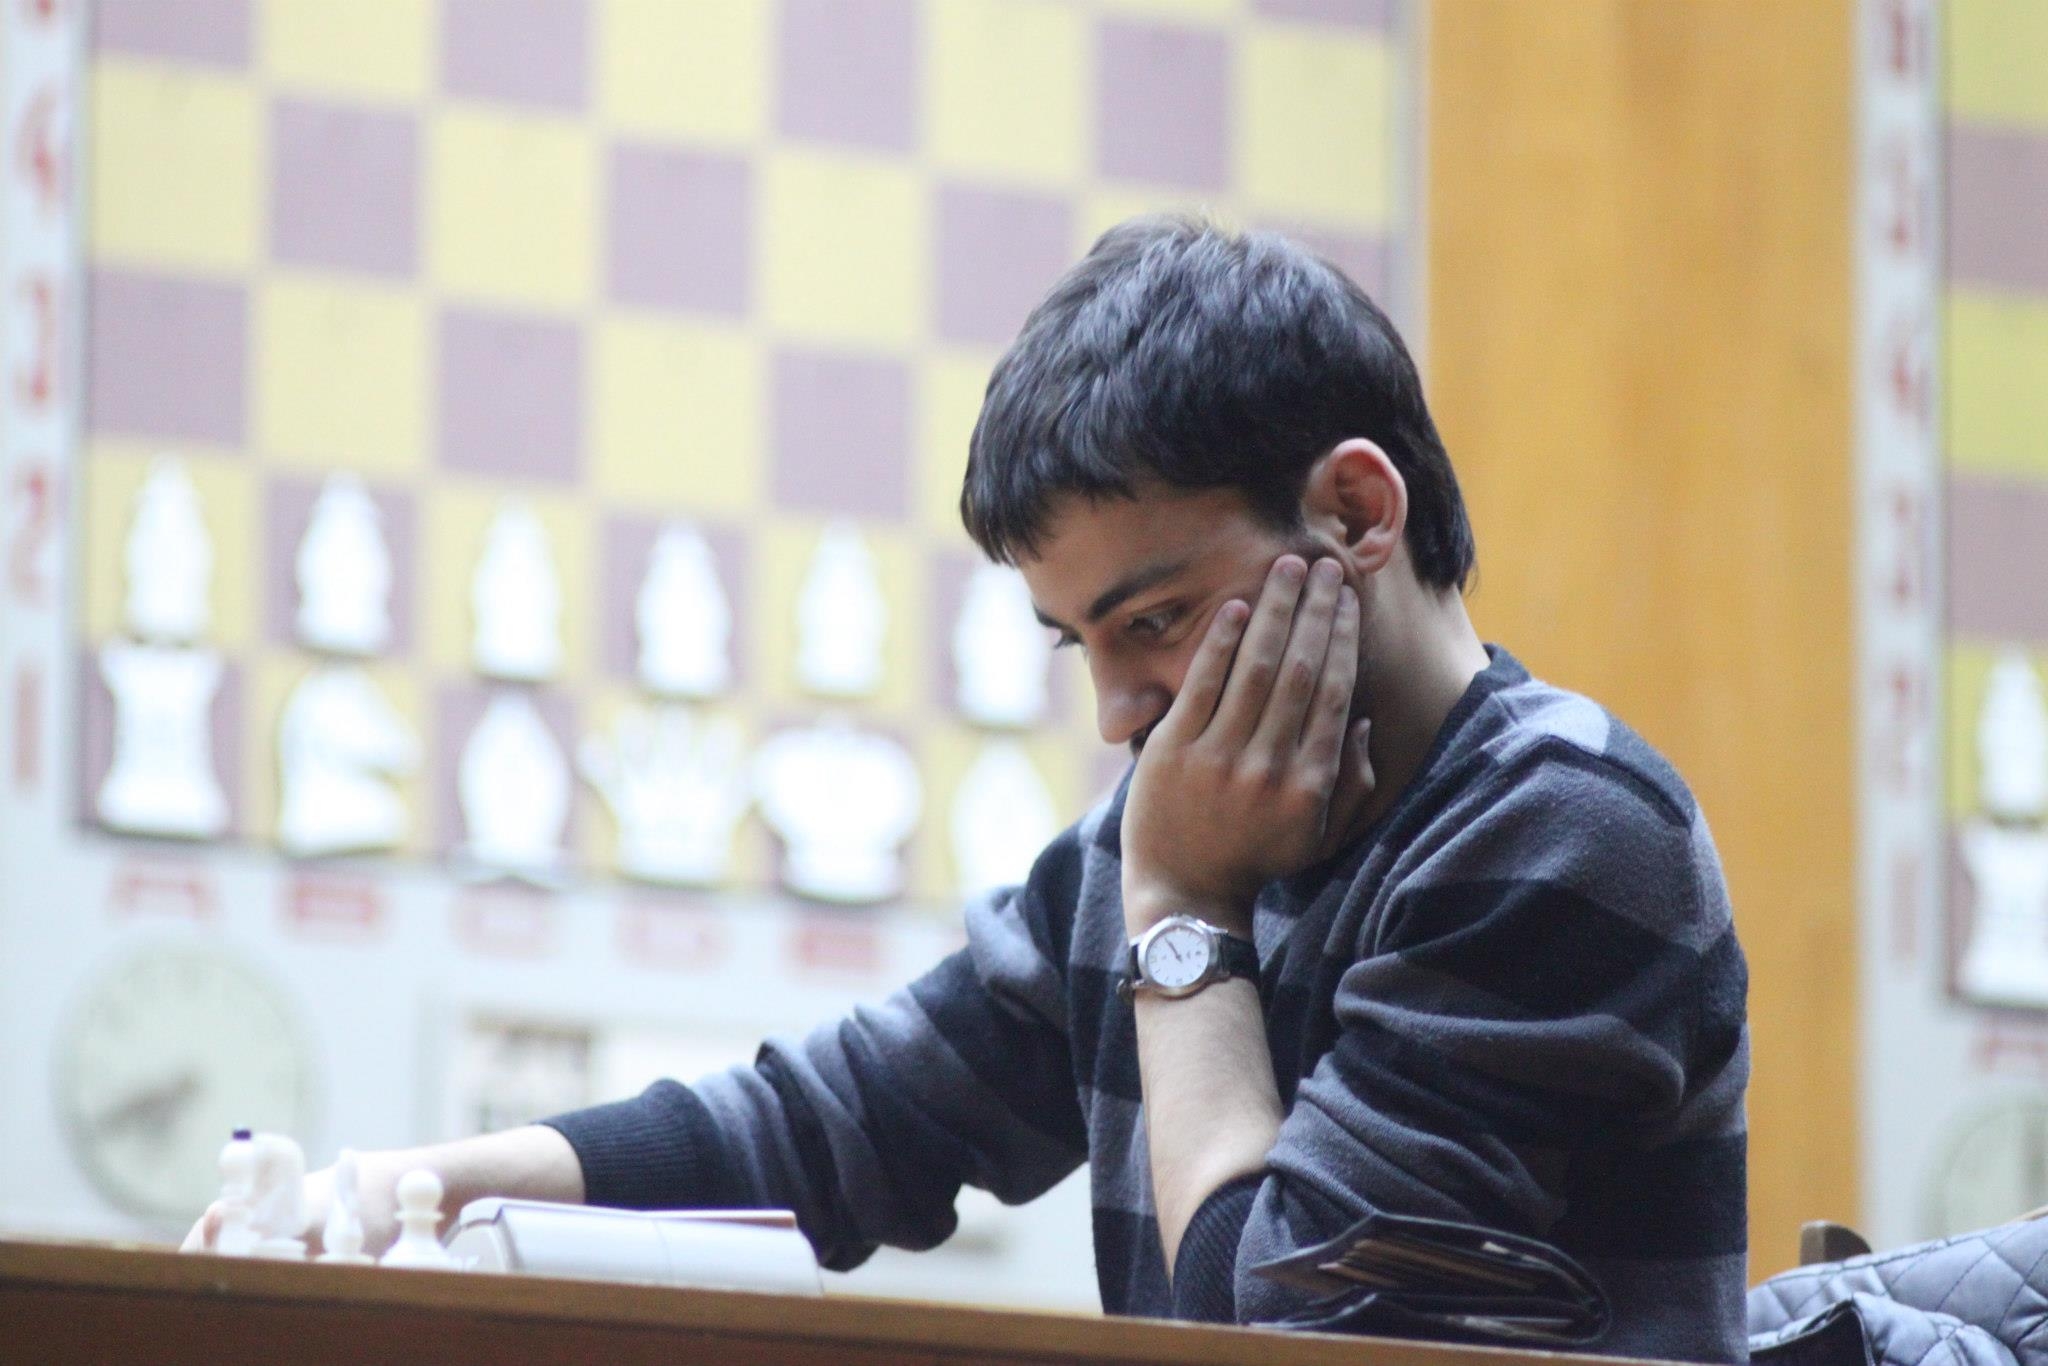 Armenian chess player gets 5 points in Groningen Open